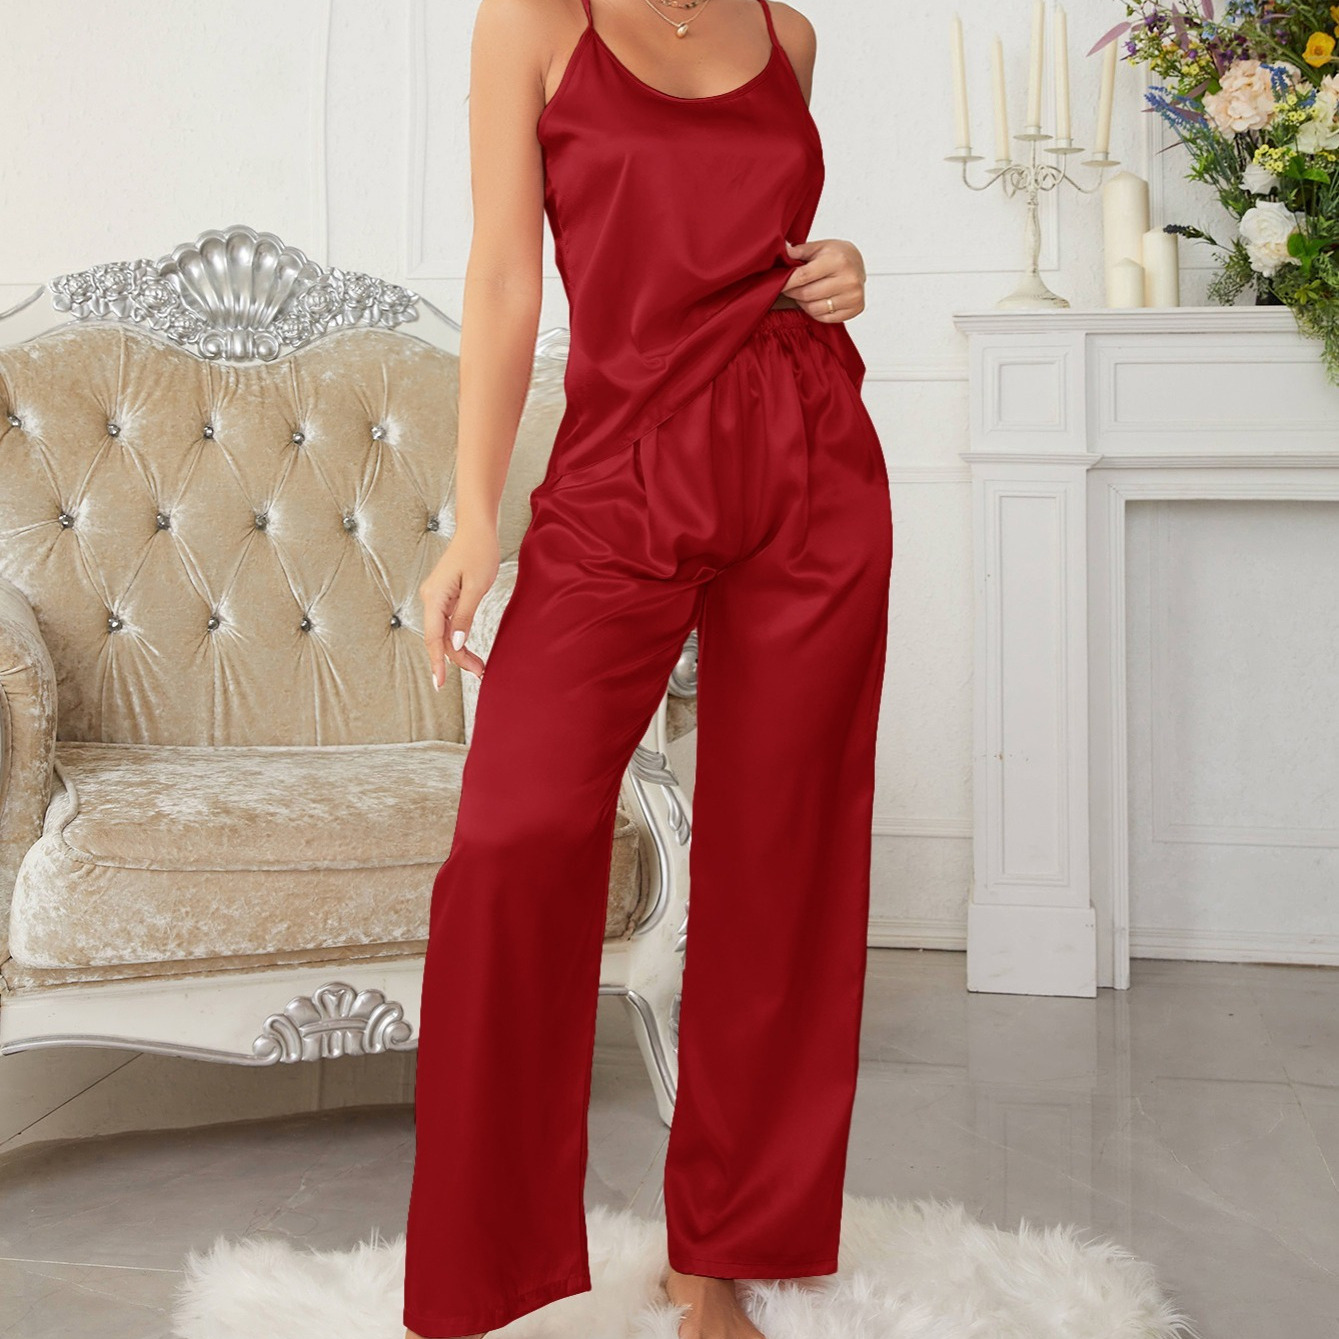 Women's Satin Backless Cami Tops Pants Pajama Sets For Valentine's ...